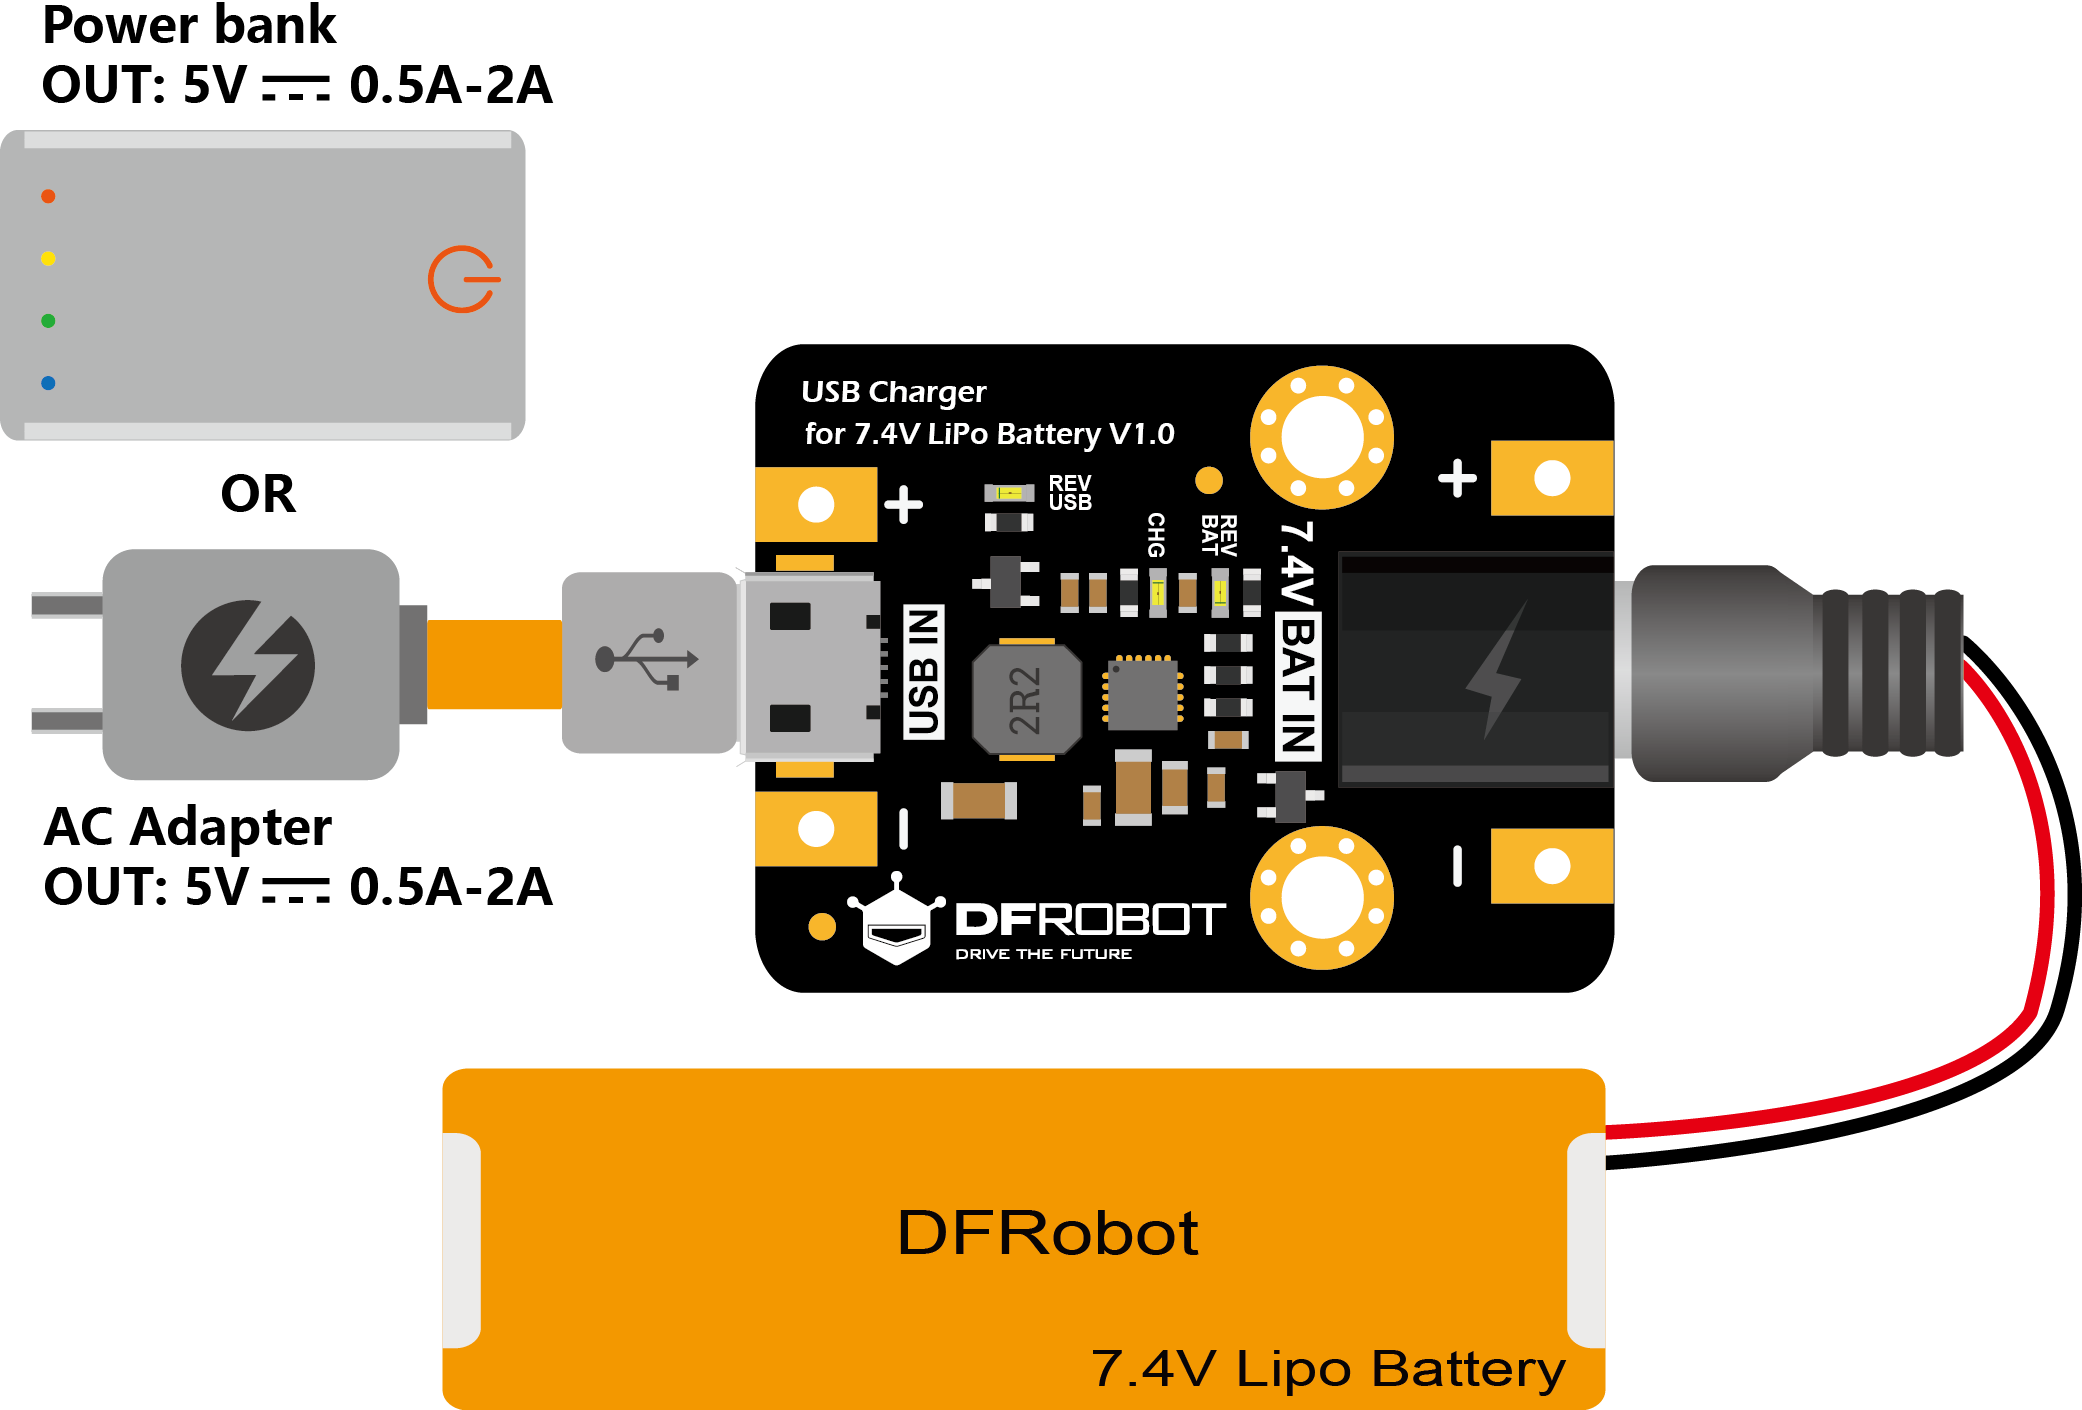 Can I charge 7.4 V battery with 5V?